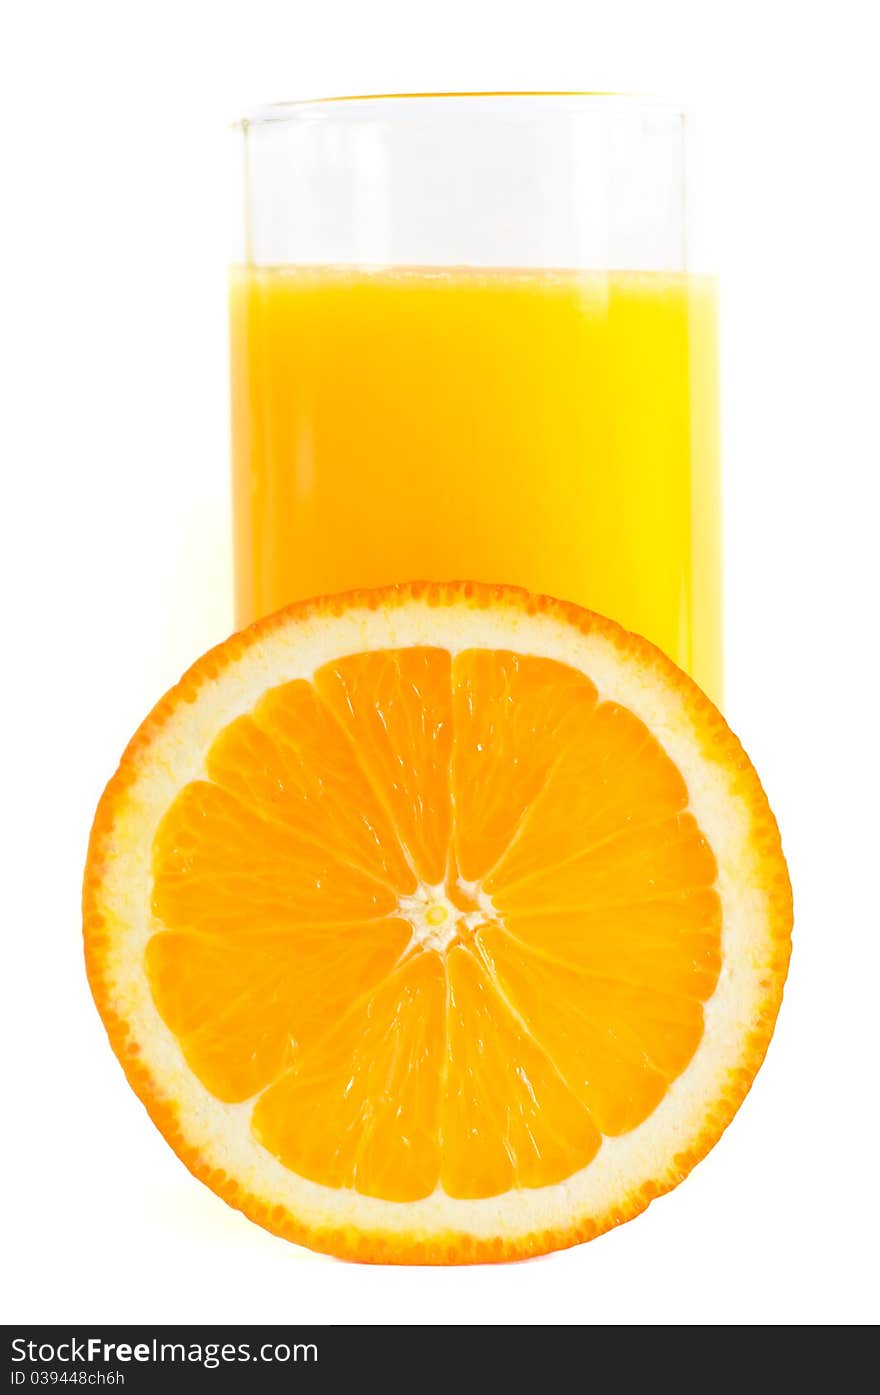 Half an orange and a glass of juice. White background. Half an orange and a glass of juice. White background.